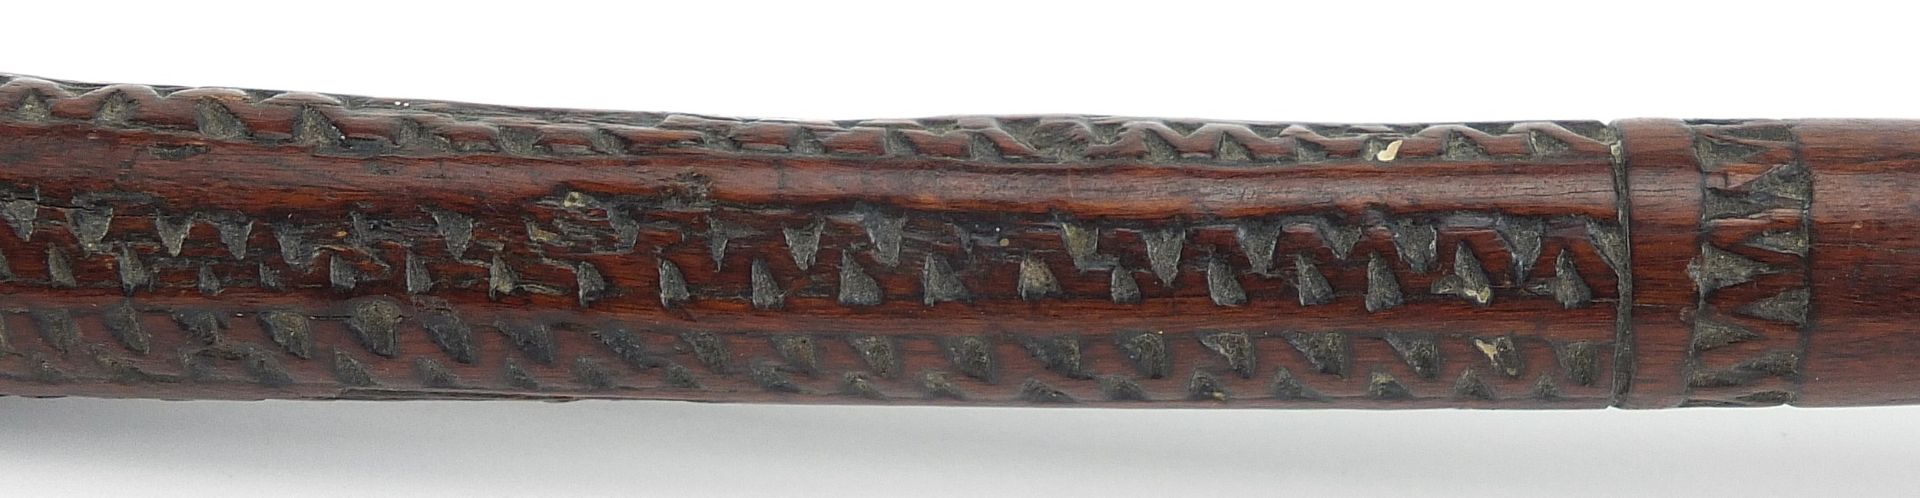 Tribal interest Fijian Iula Tavatava throwing club with carved grip, 38.5cm in length - Image 4 of 4